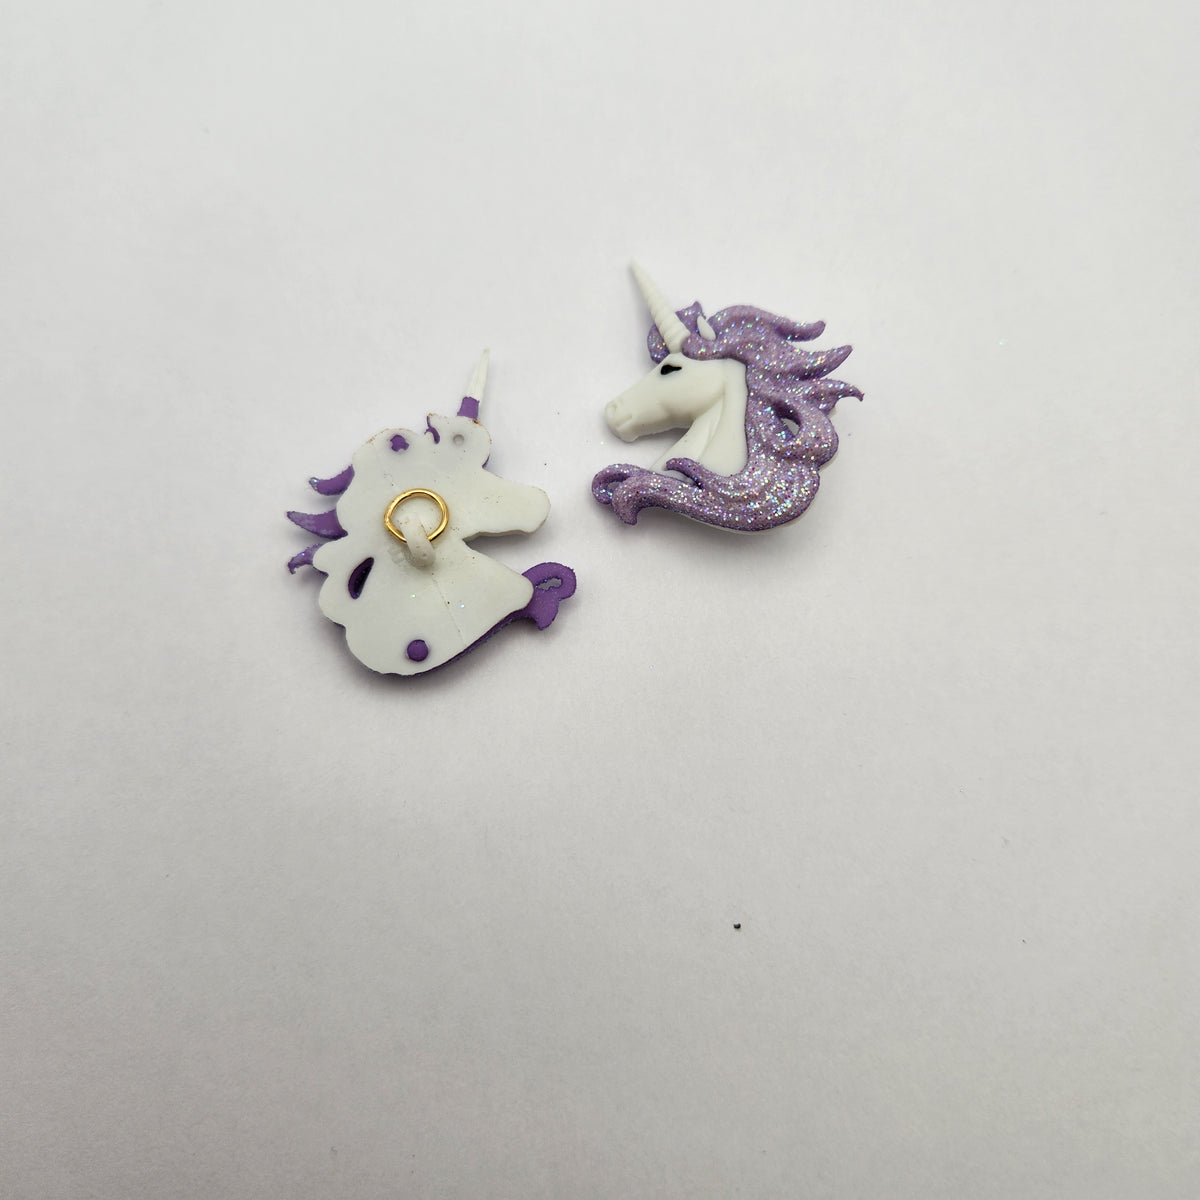 Turning Embellishments into Jewelry Charms